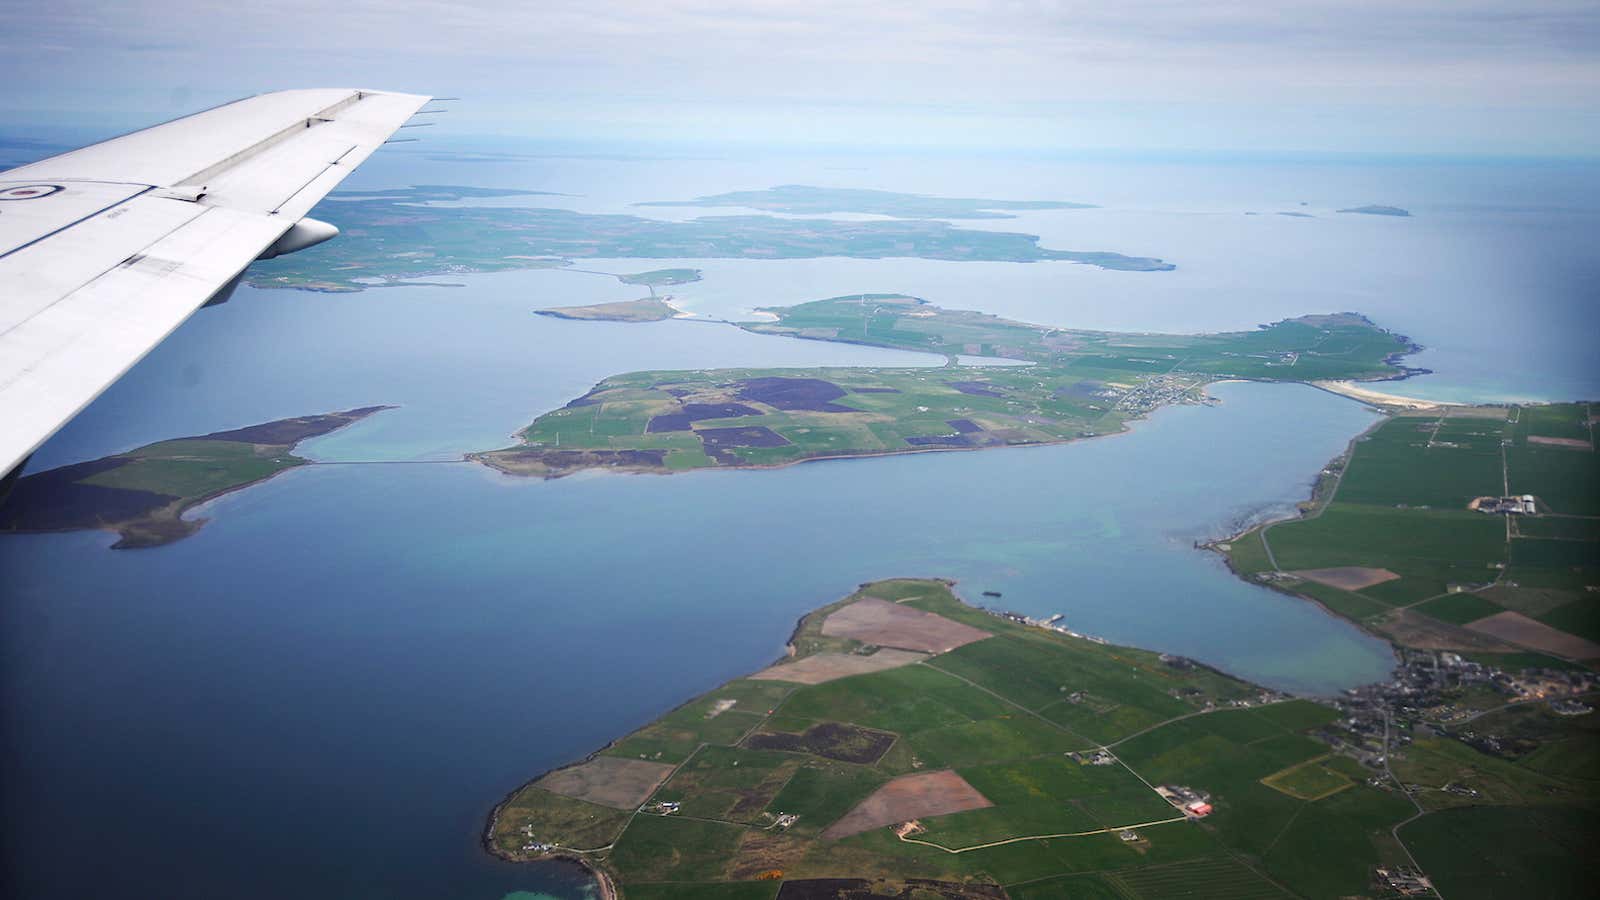 Above it all, including the the Orkney Islands.